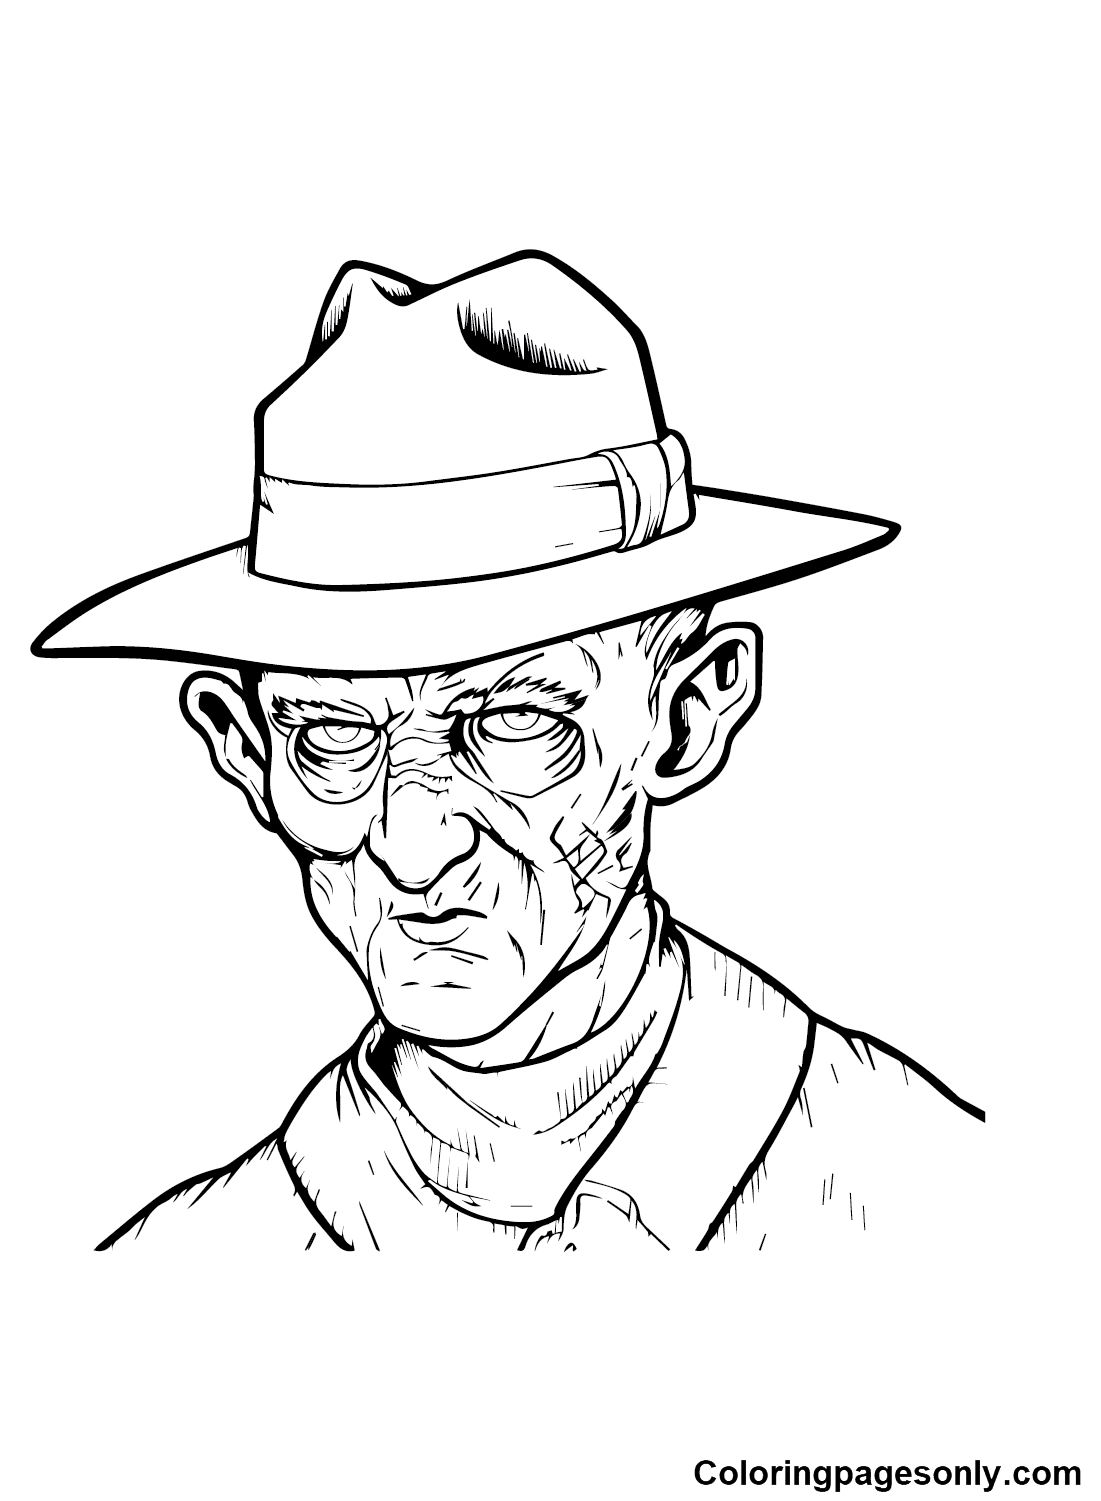 Movie Freddy Krueger Coloring Pages